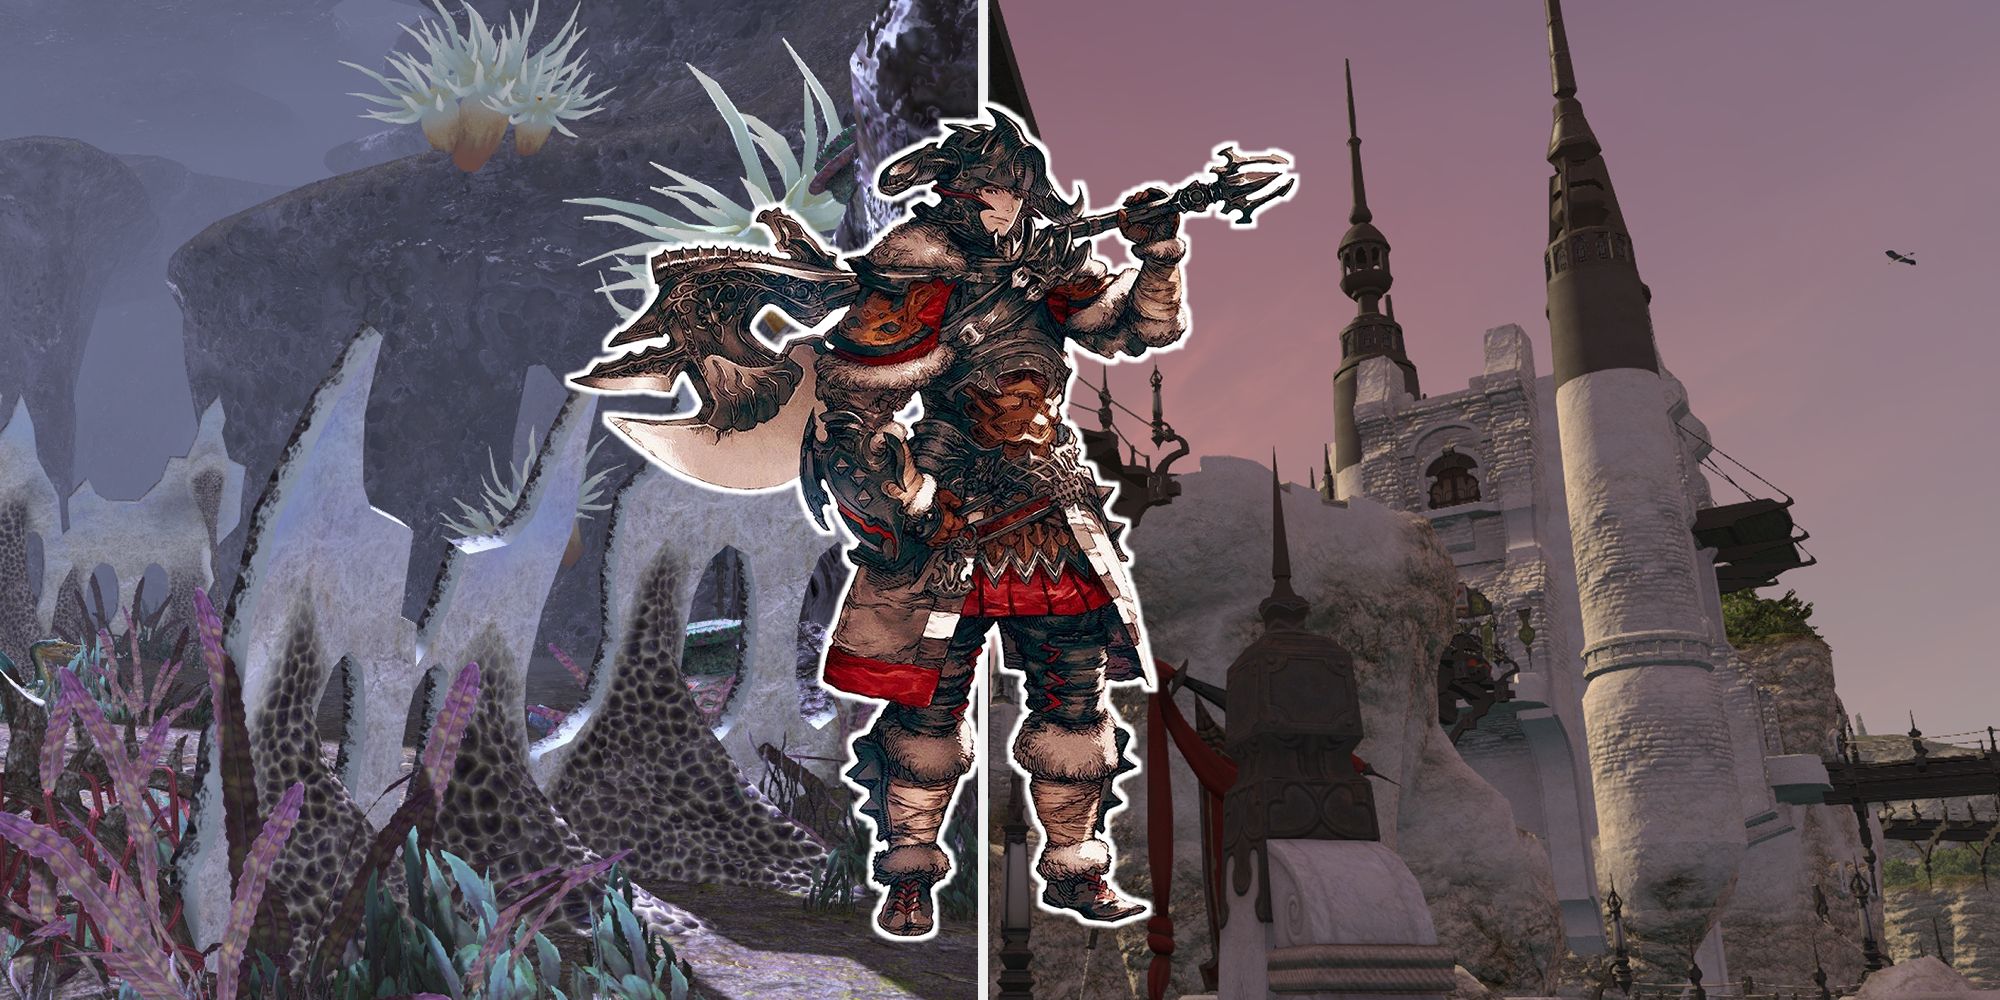 A warrior from Final Fantasy 14 in heavy armour with a large axe. There is a split image of a cliffside town and an aquatic battlefield.